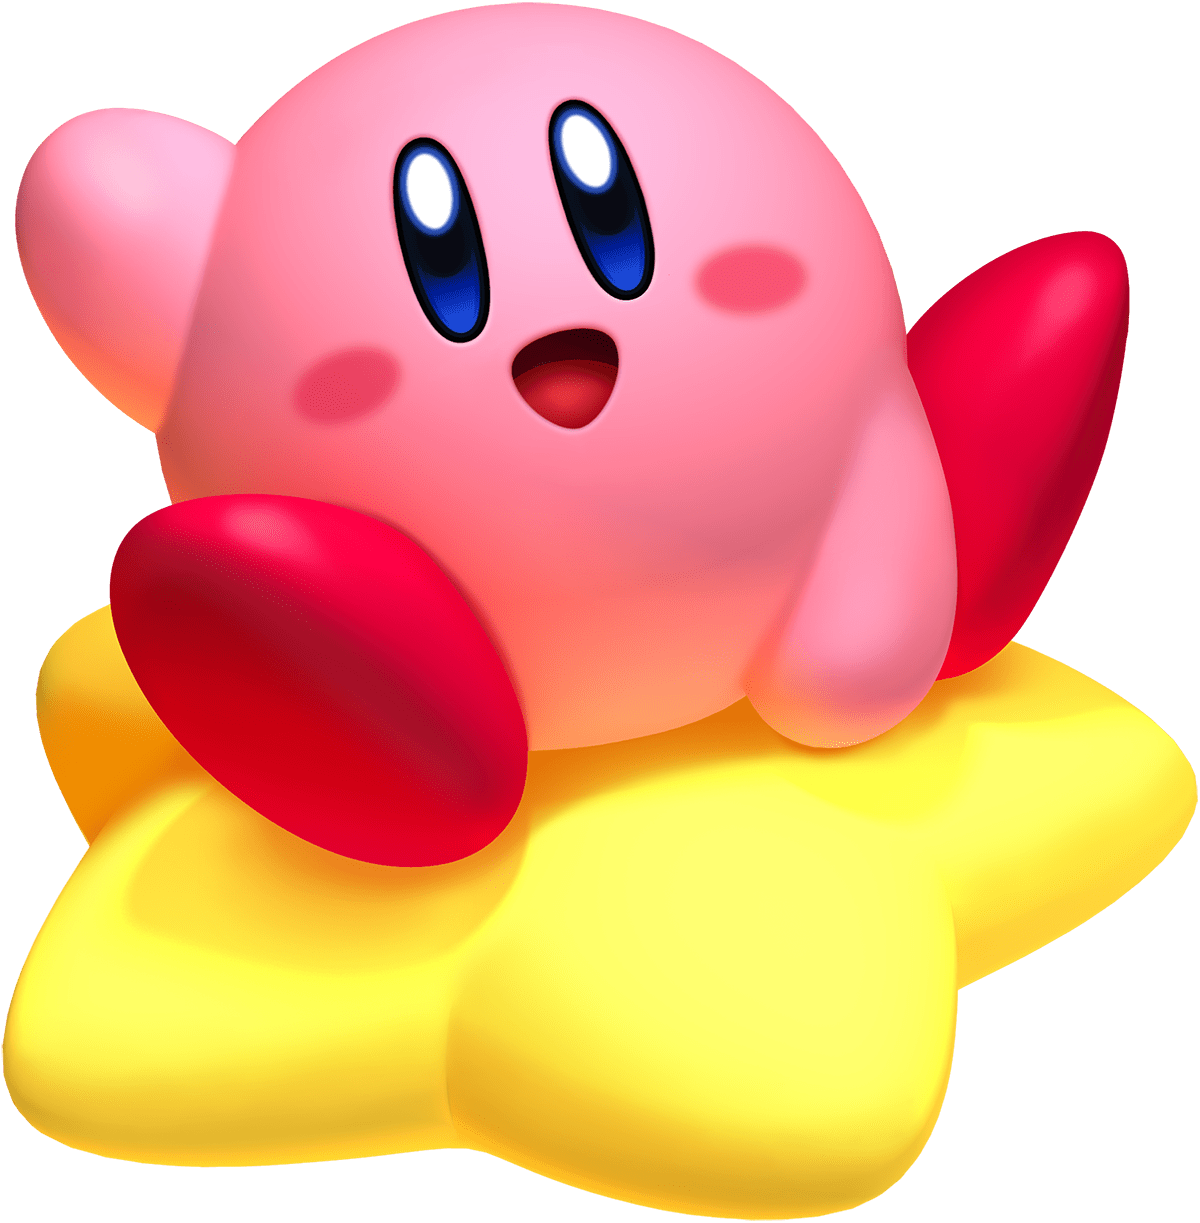 Kirby waving on floating star